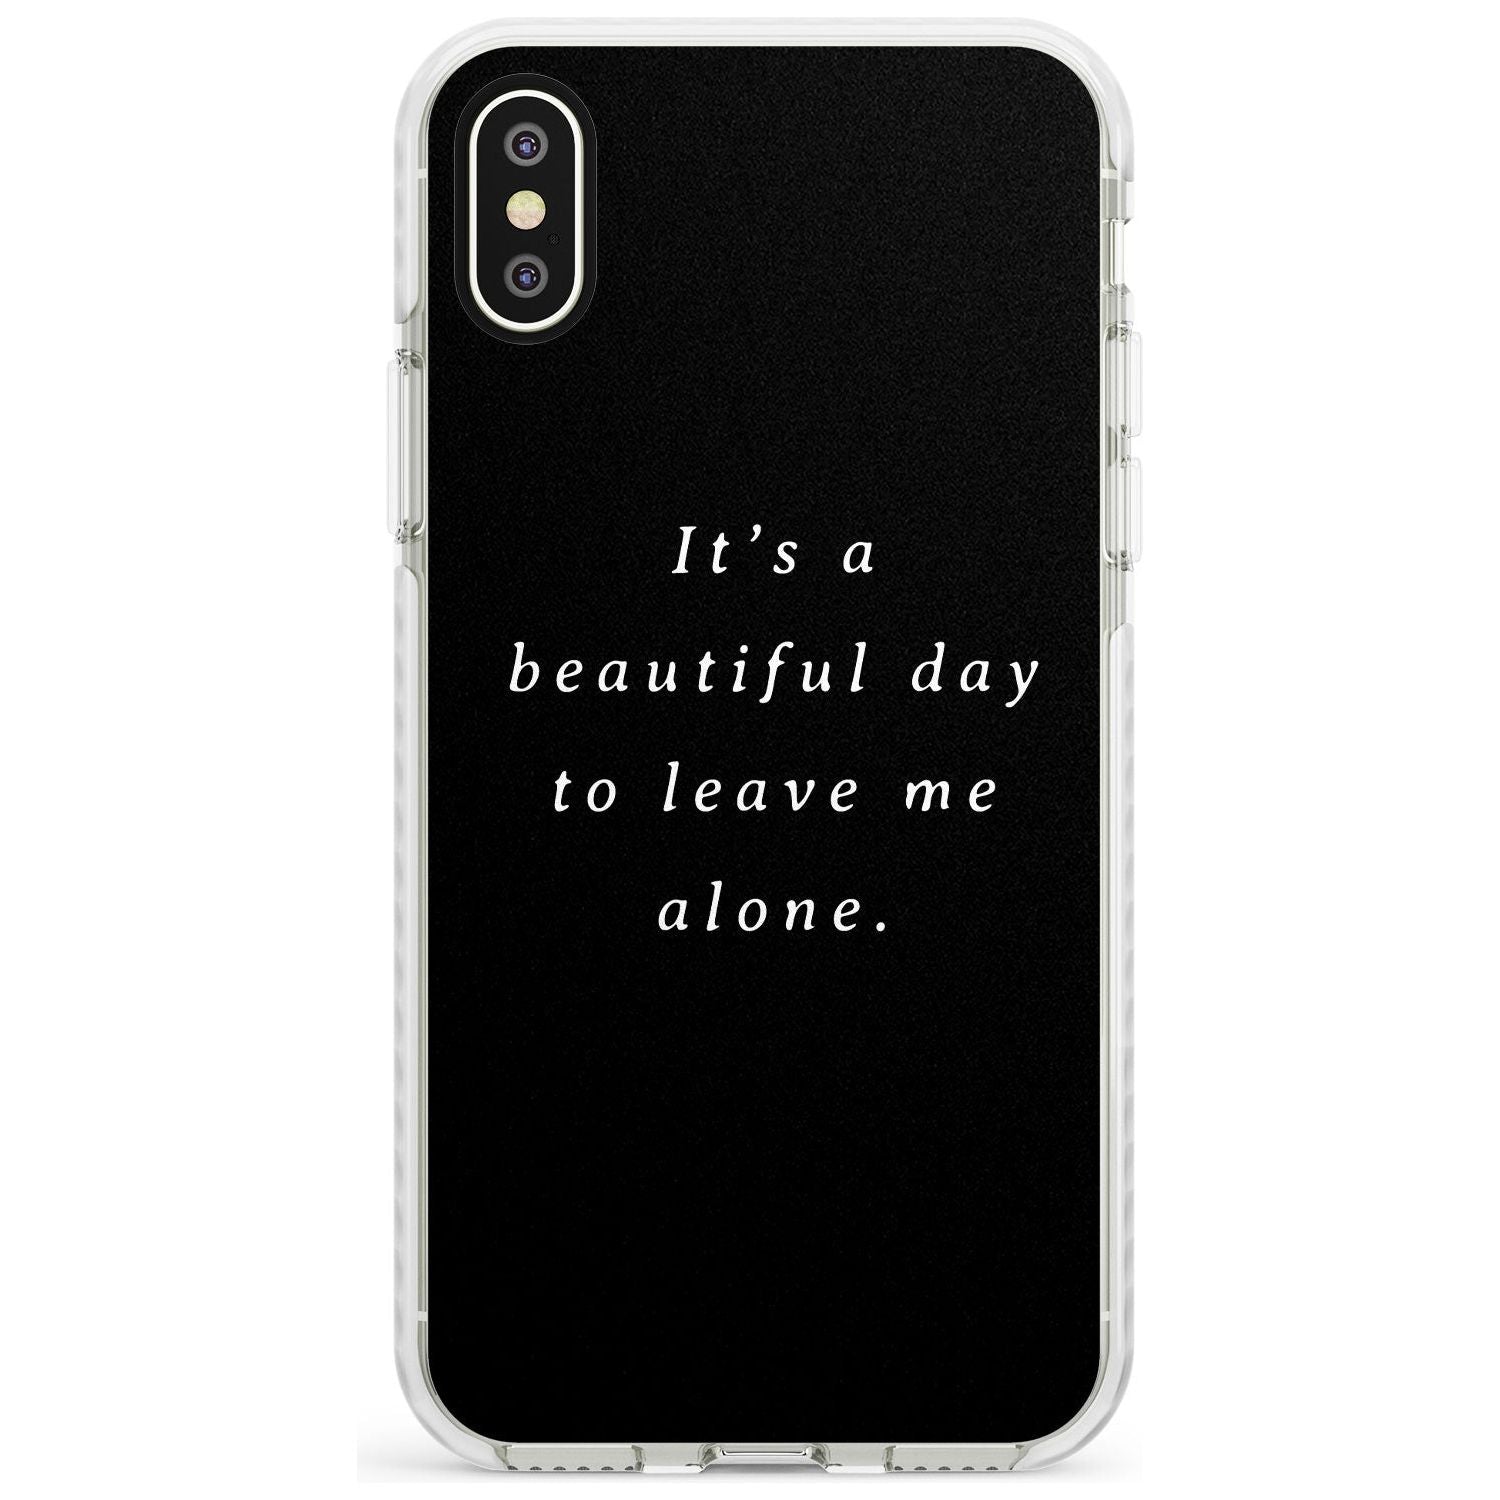 Leave me alone Impact Phone Case for iPhone X XS Max XR